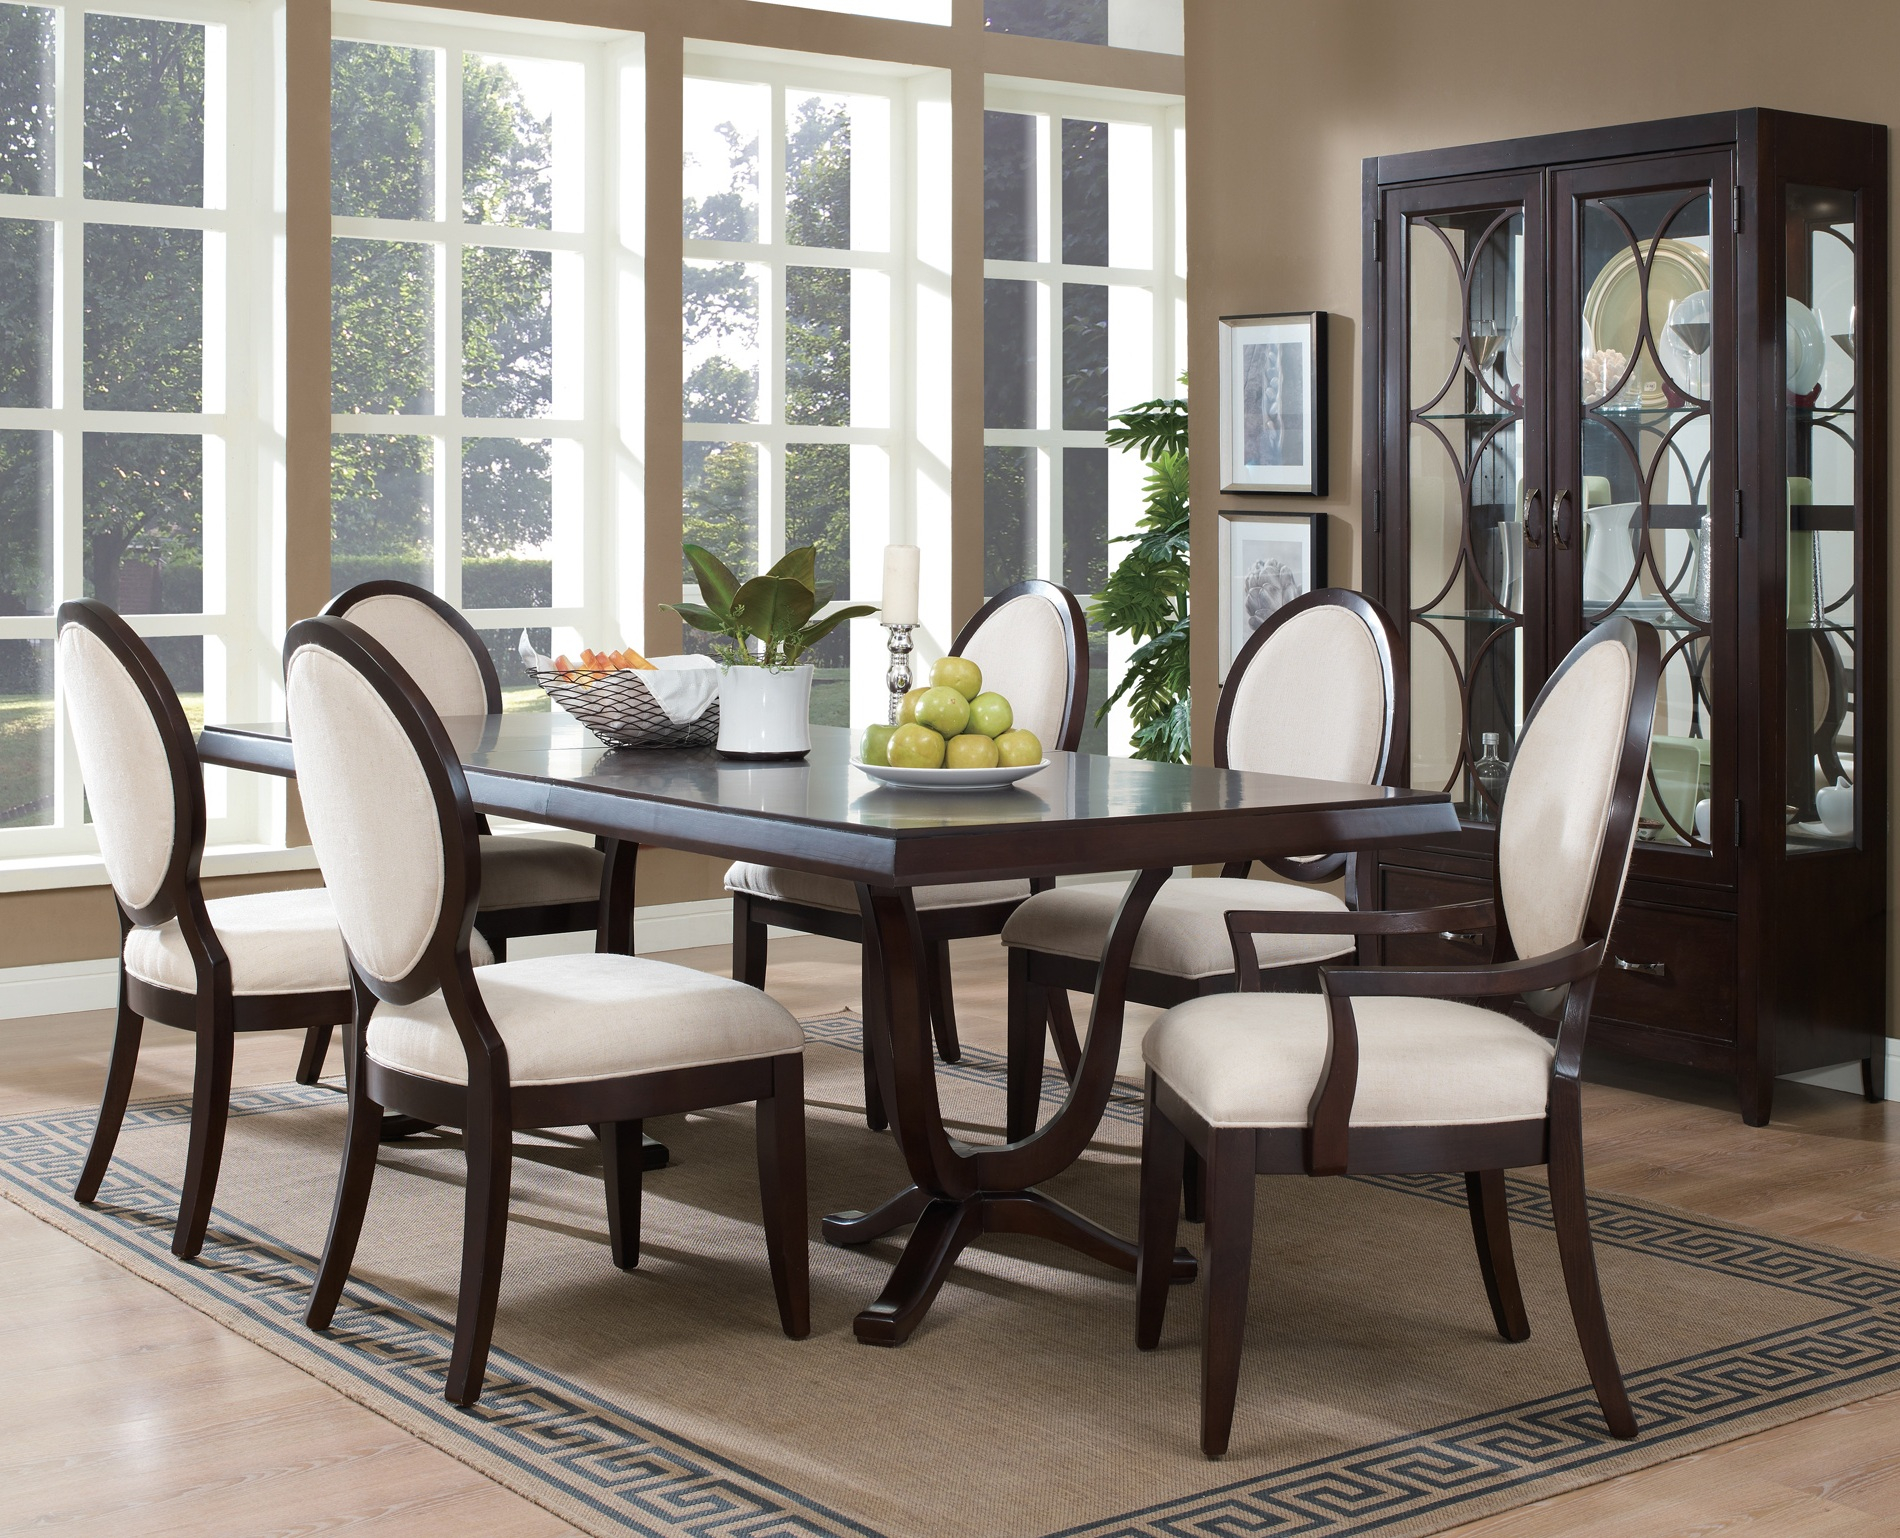 Modern Dining Room Tables South Africa Latest Home Decor for size 1900 X 1538